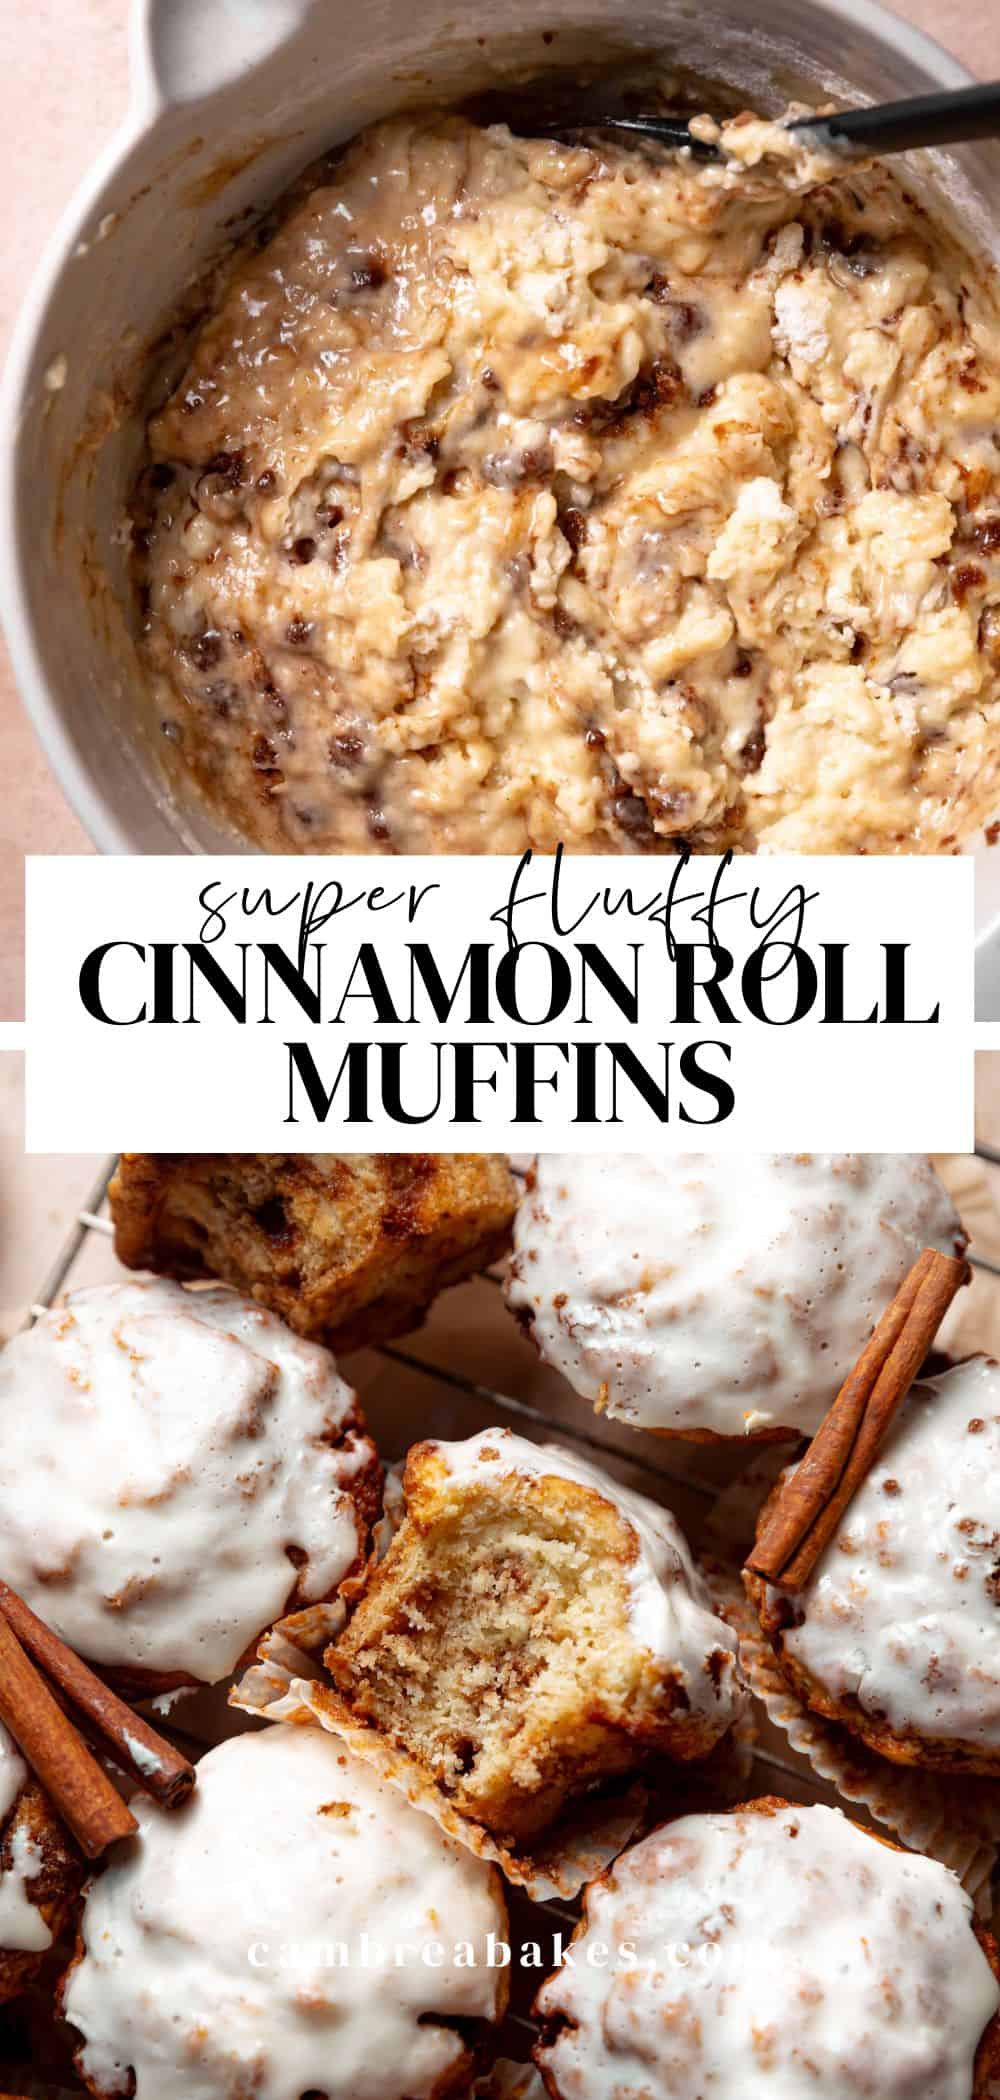 Cinnamon Roll Muffins with Cream Cheese Icing - Cambrea Bakes